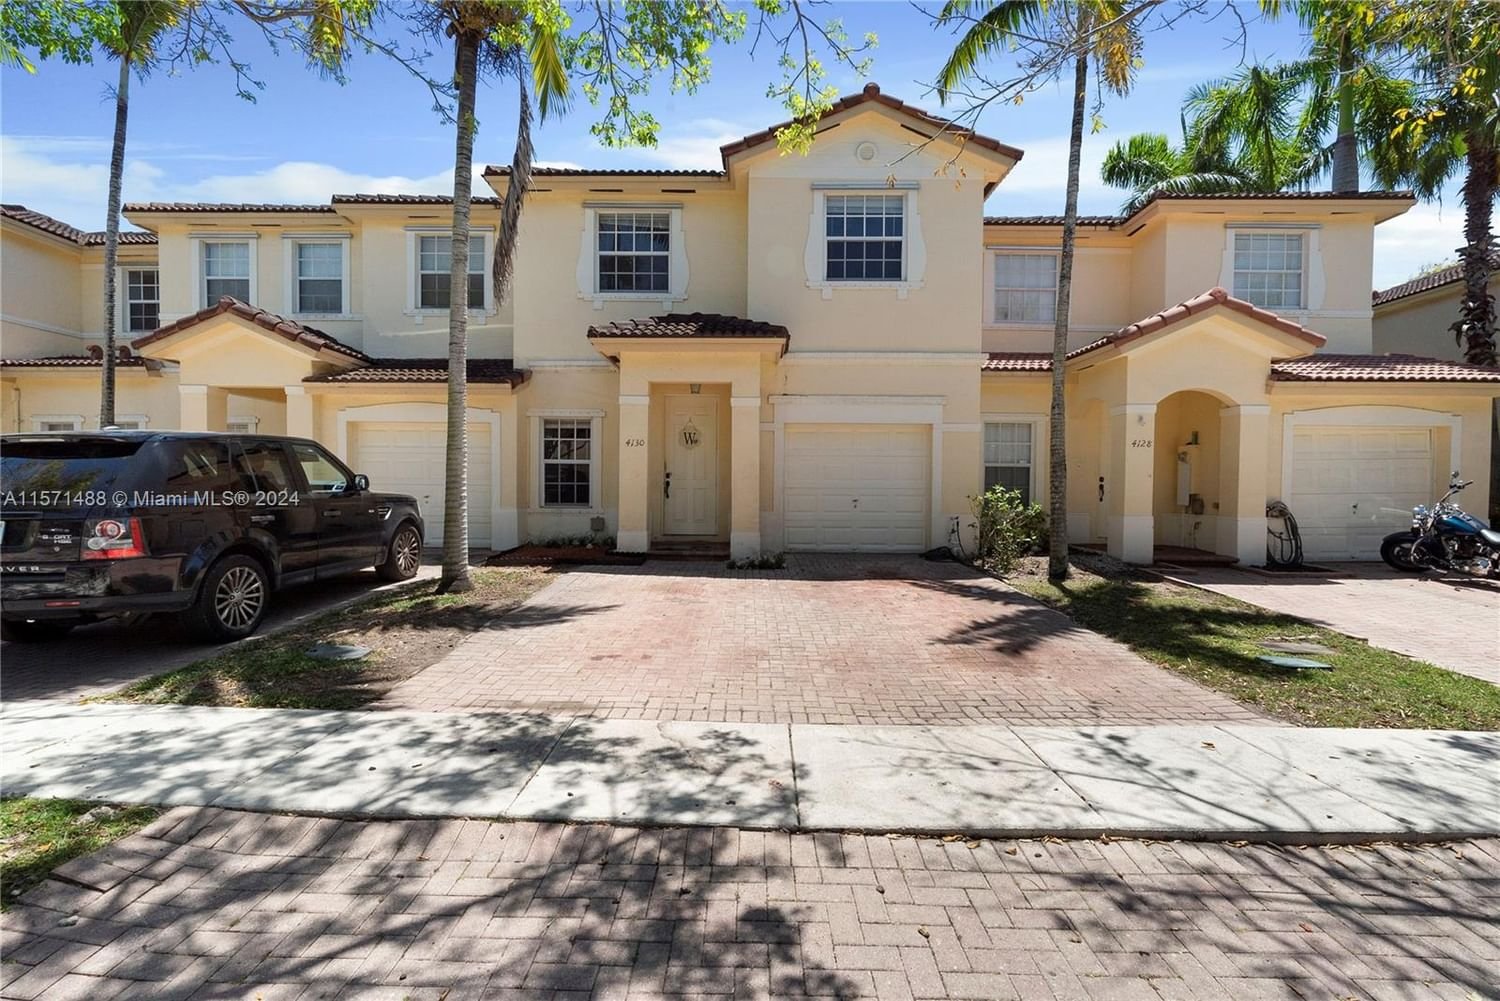 Real estate property located at 4130 24th St, Miami-Dade County, FLORIDIAN ISLES, Homestead, FL